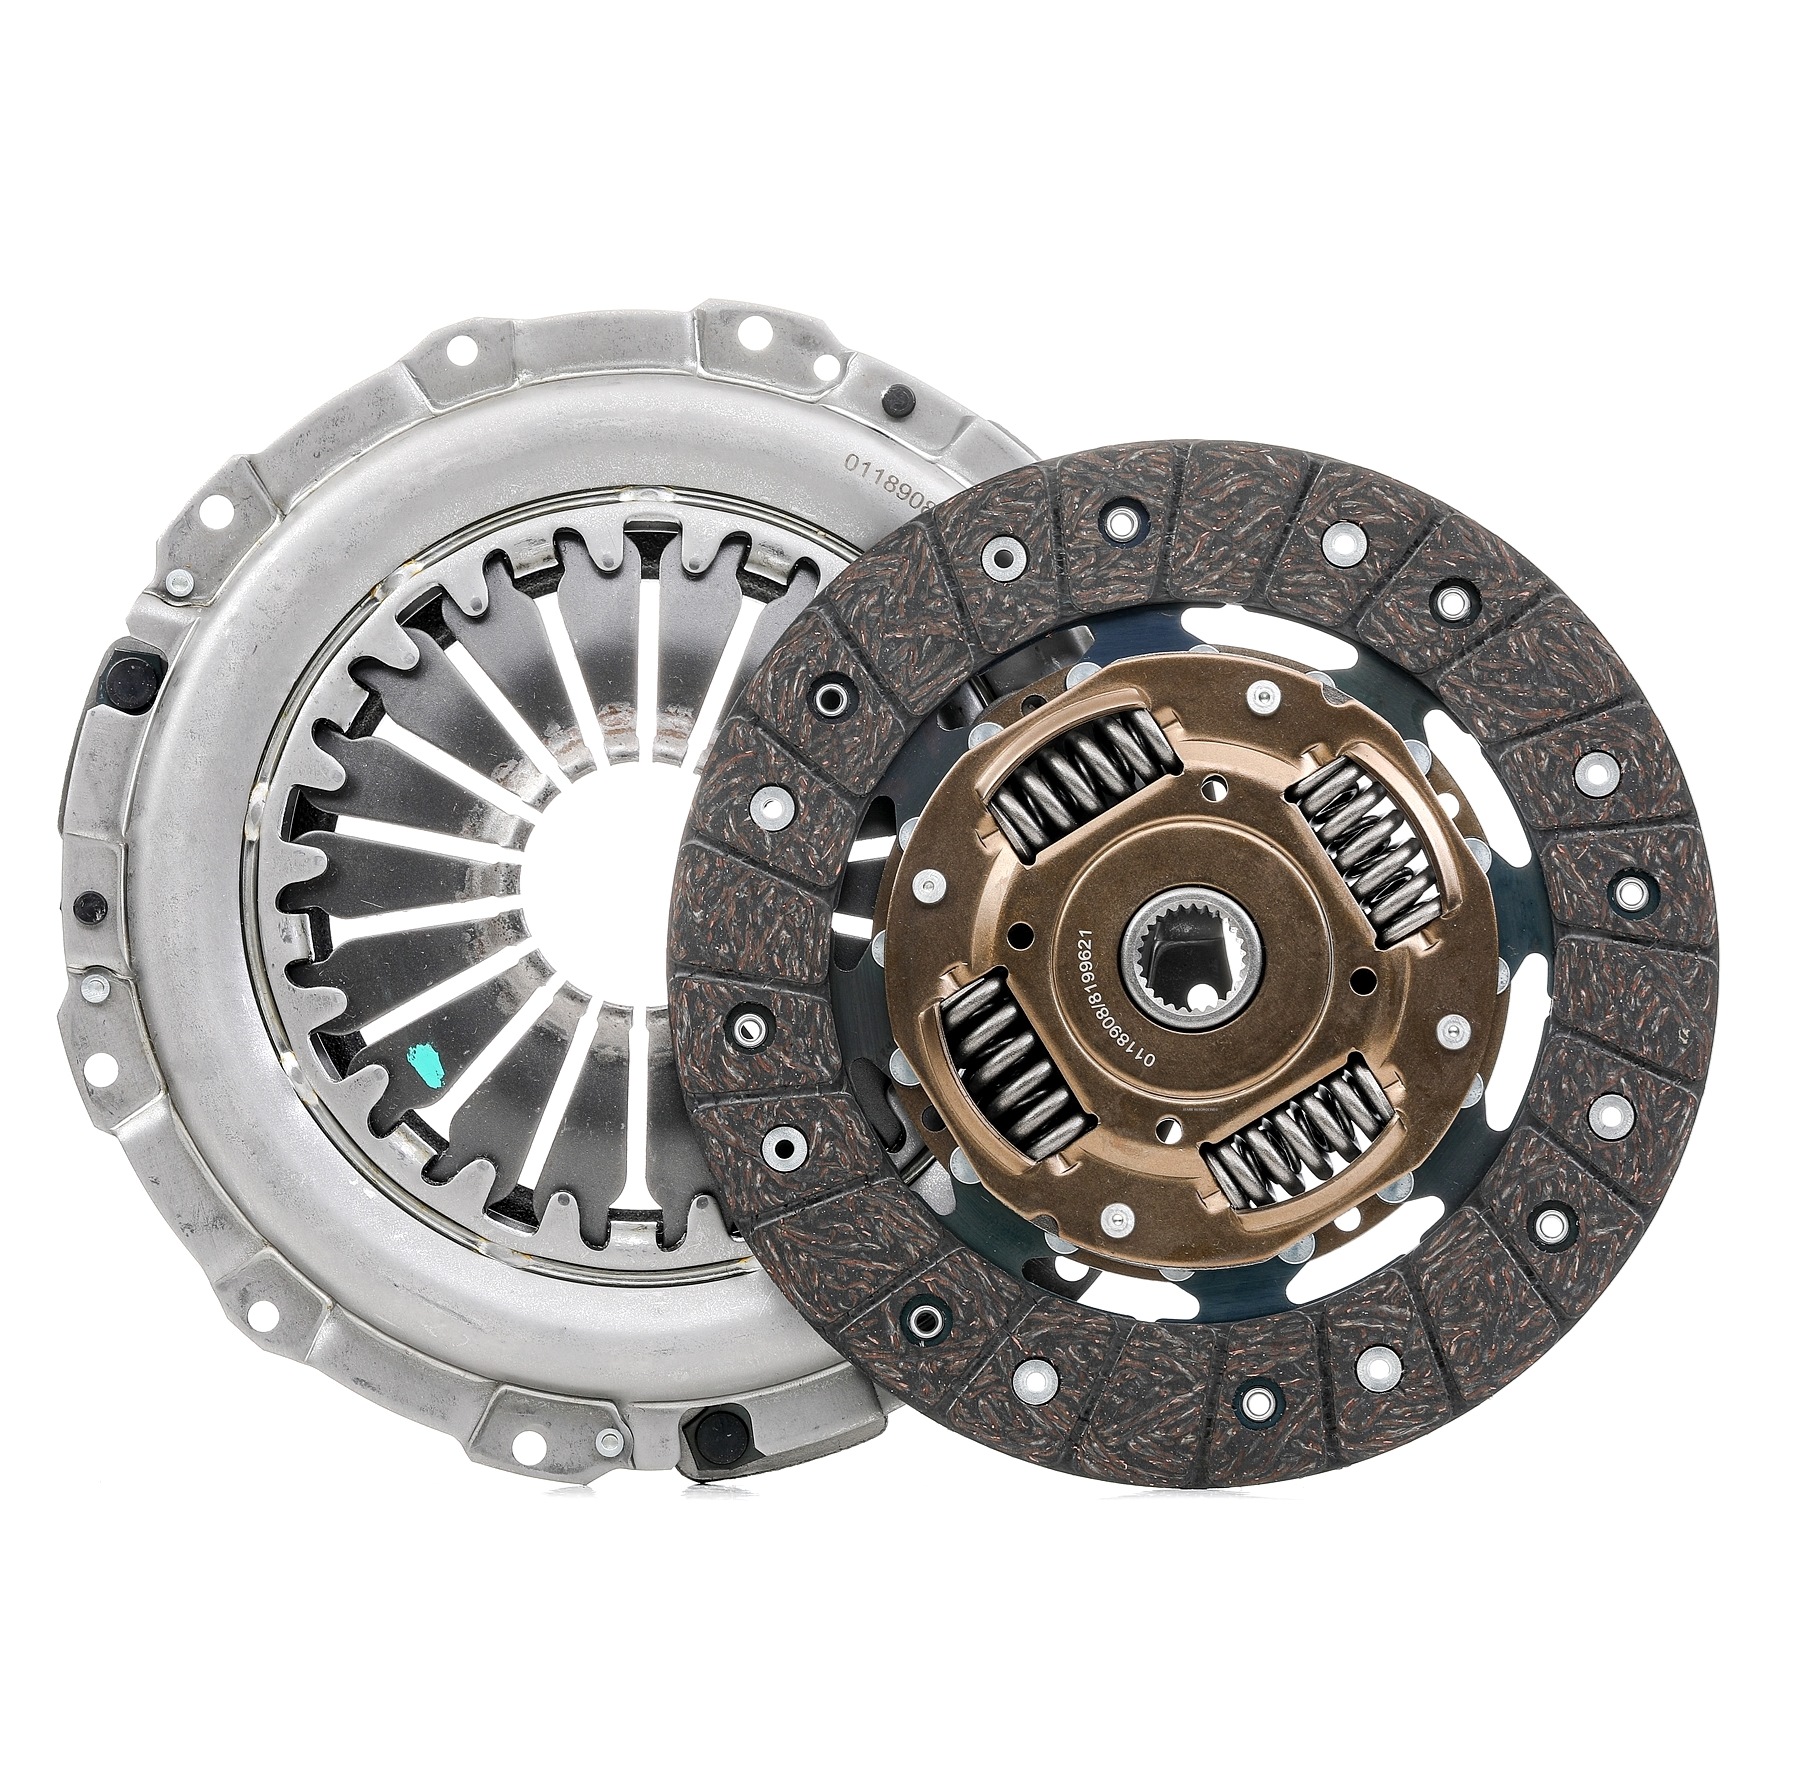 SKCK-0100221 STARK Clutch set RENAULT with clutch pressure plate, without central slave cylinder, with clutch disc, 215mm